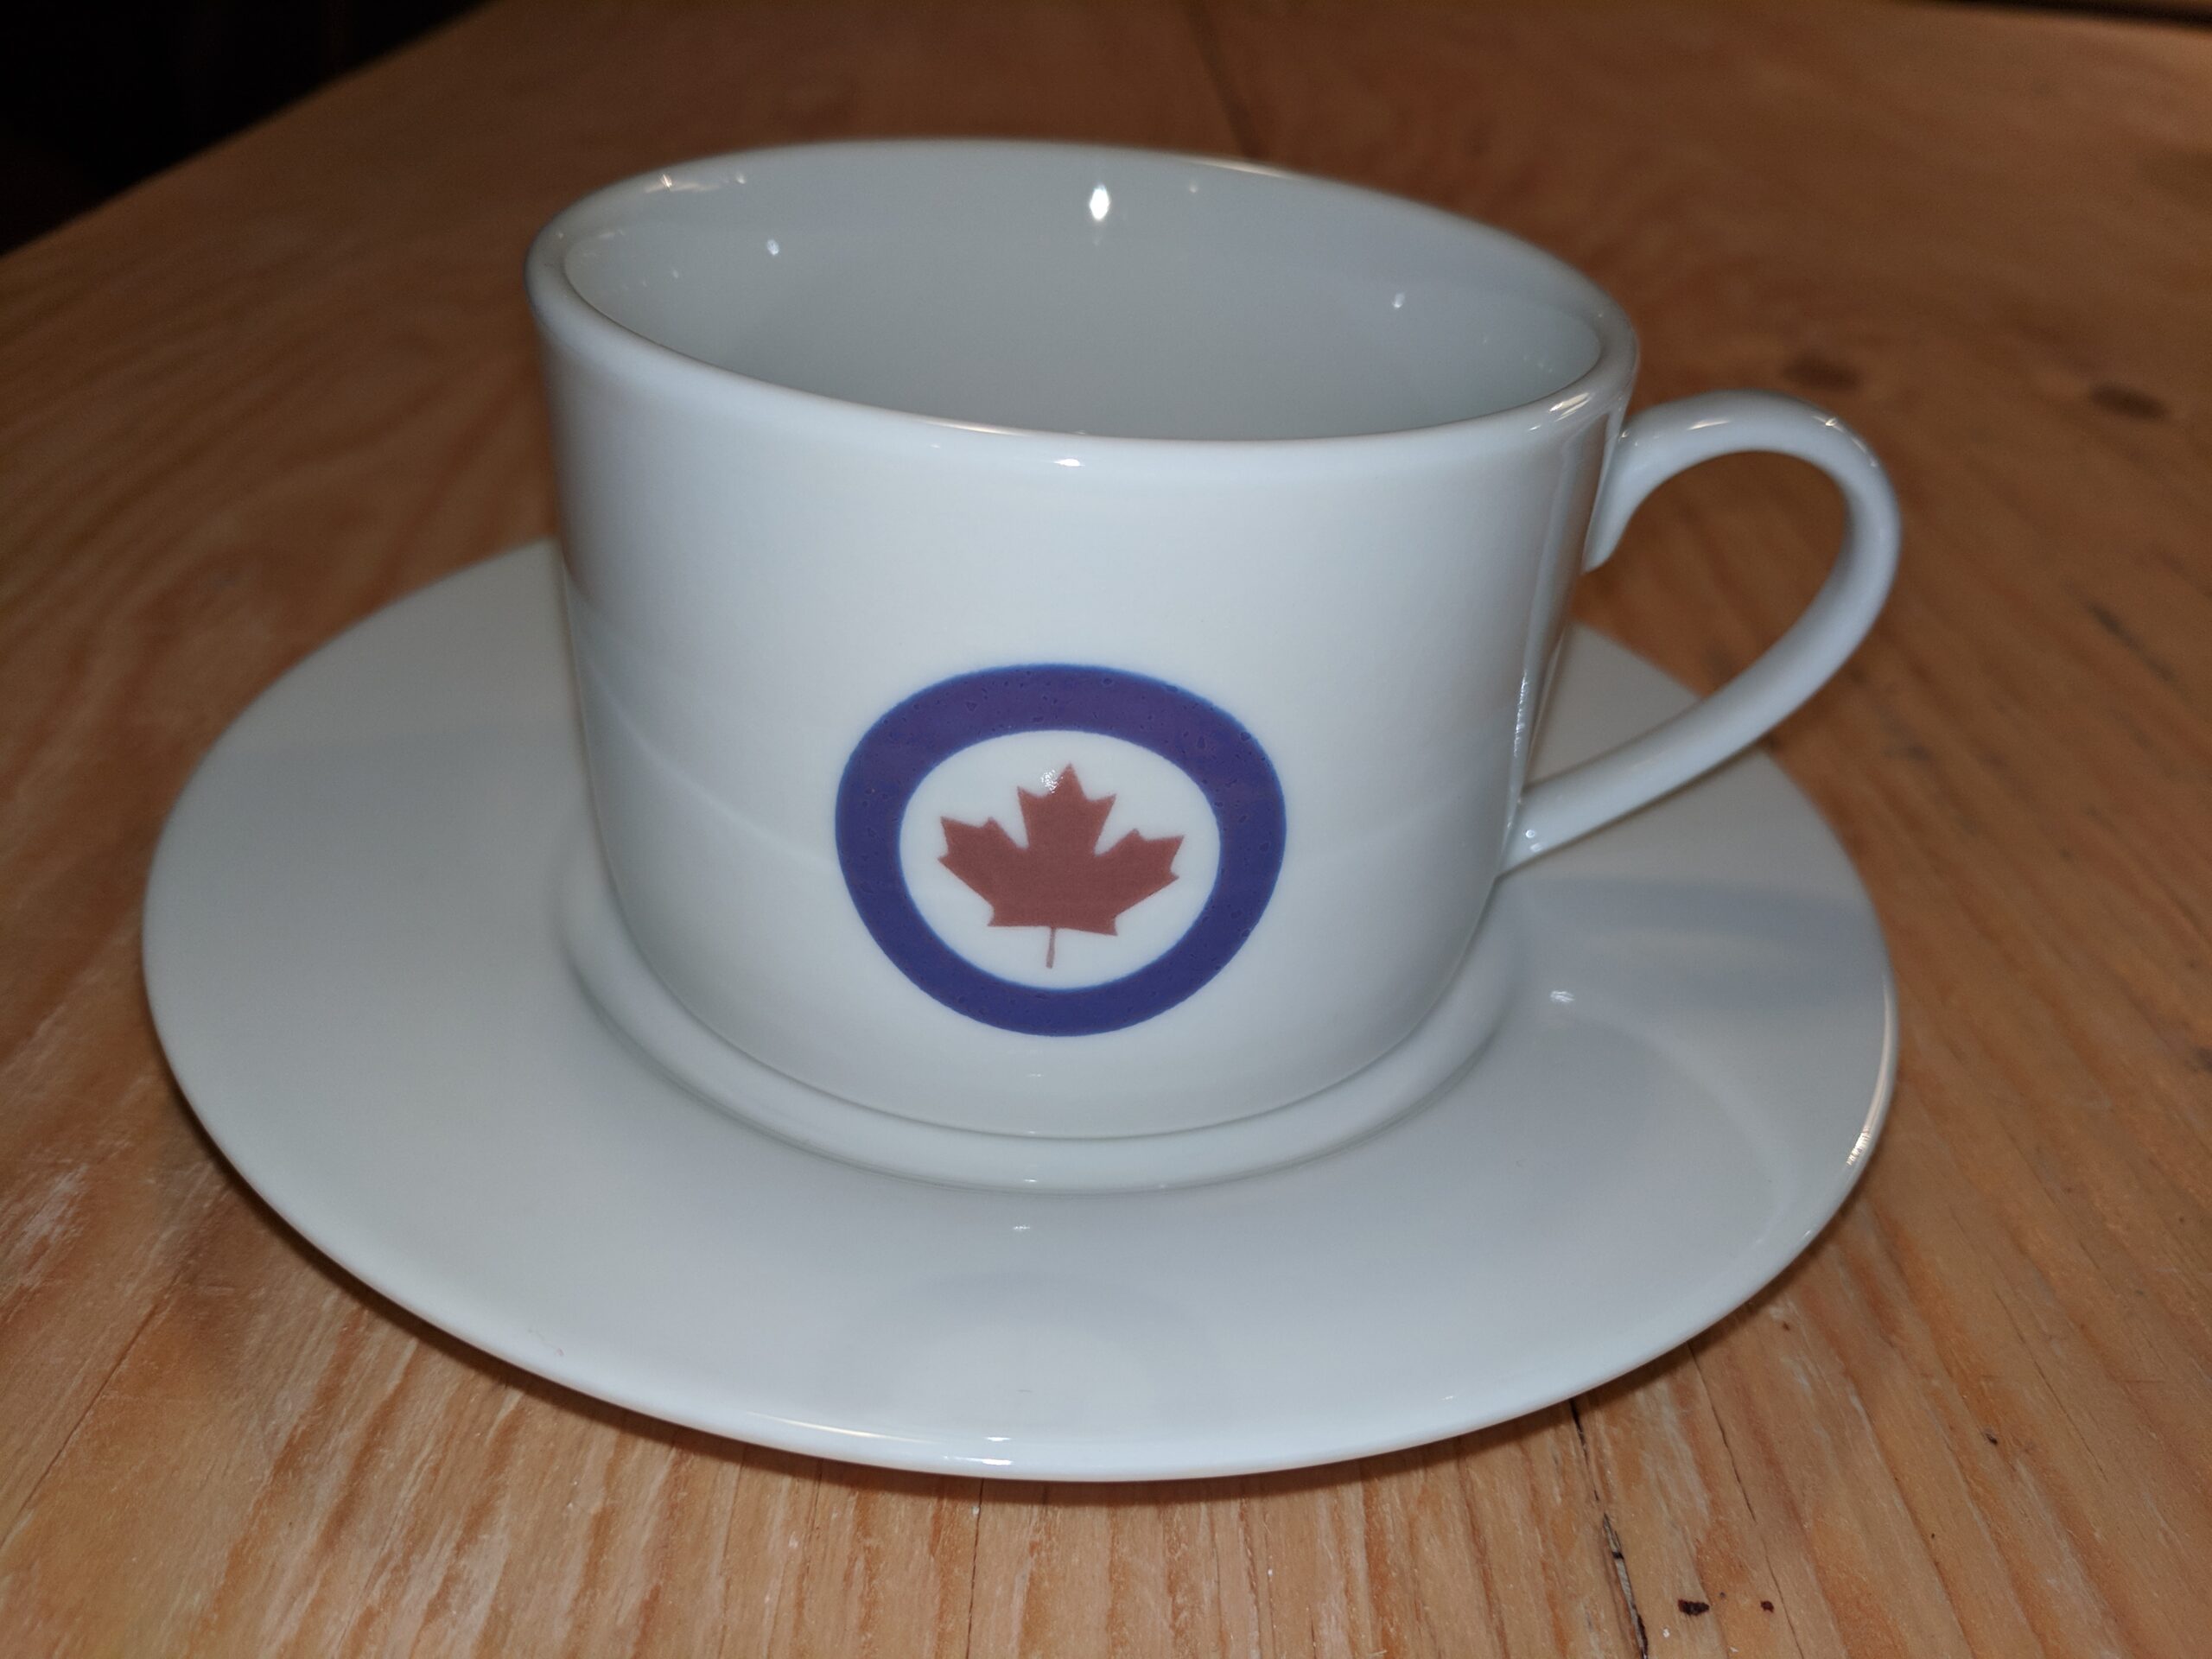 custom printed modern cups and saucers (called the can cup) these were printed for the Prime Minister in Canada with Canadian Airforce logo